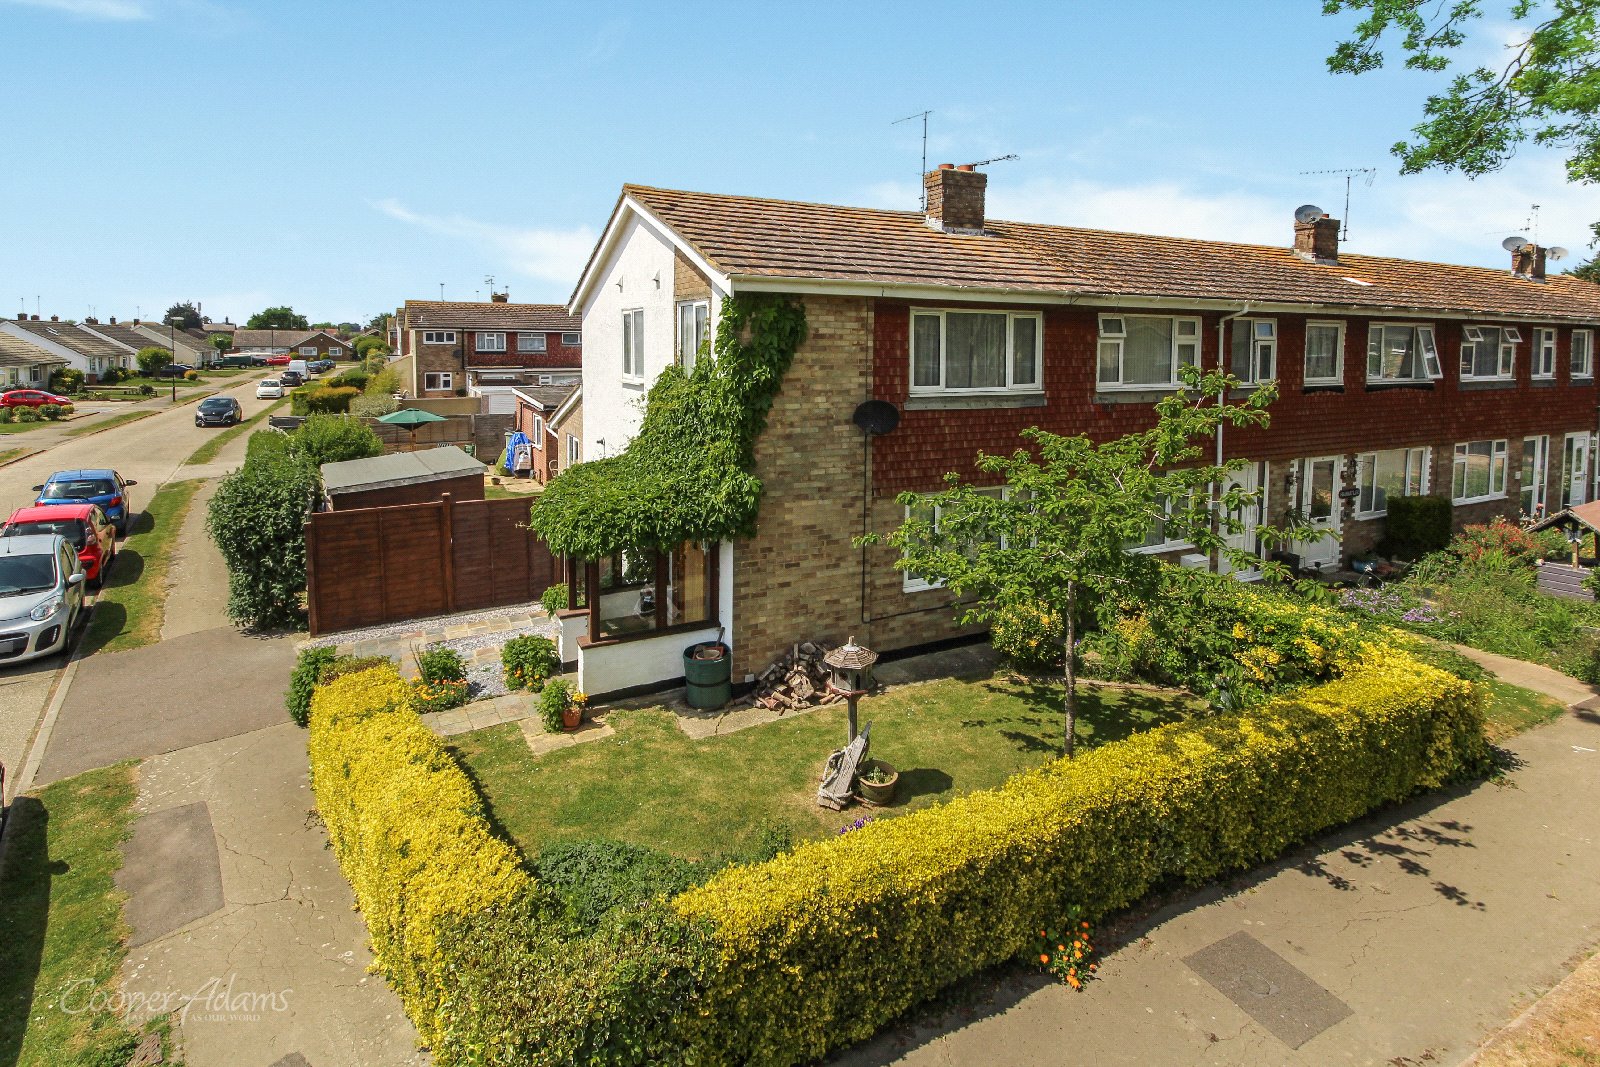 3 bed  for sale in Ambersham Crescent, East Preston, BN16